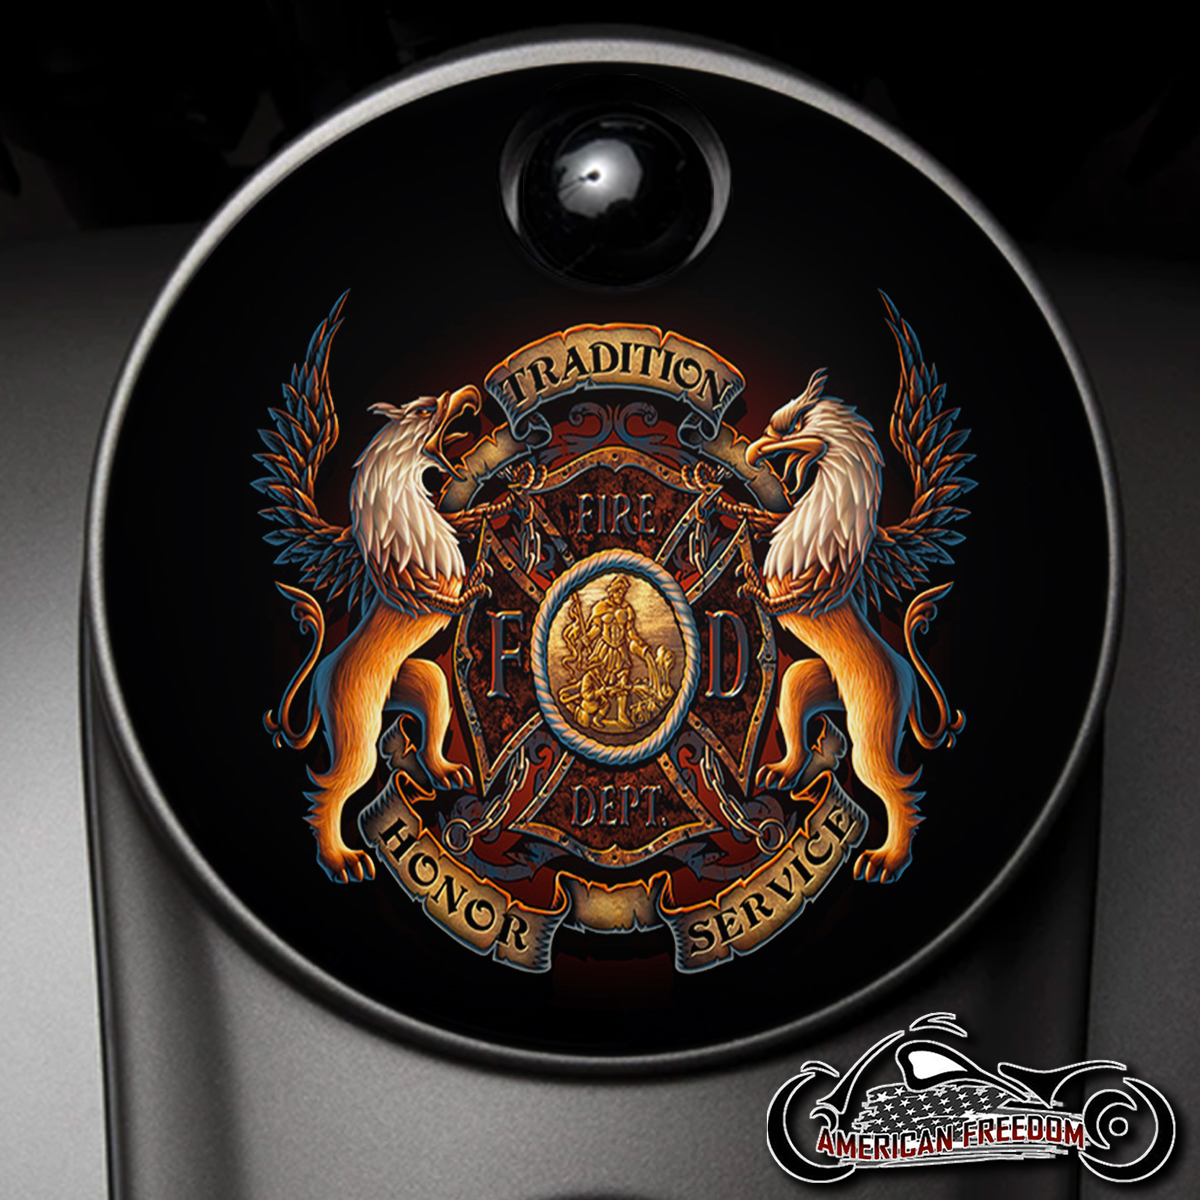 Custom Fuel Cover - Fire Dept. Tradition Honor Service